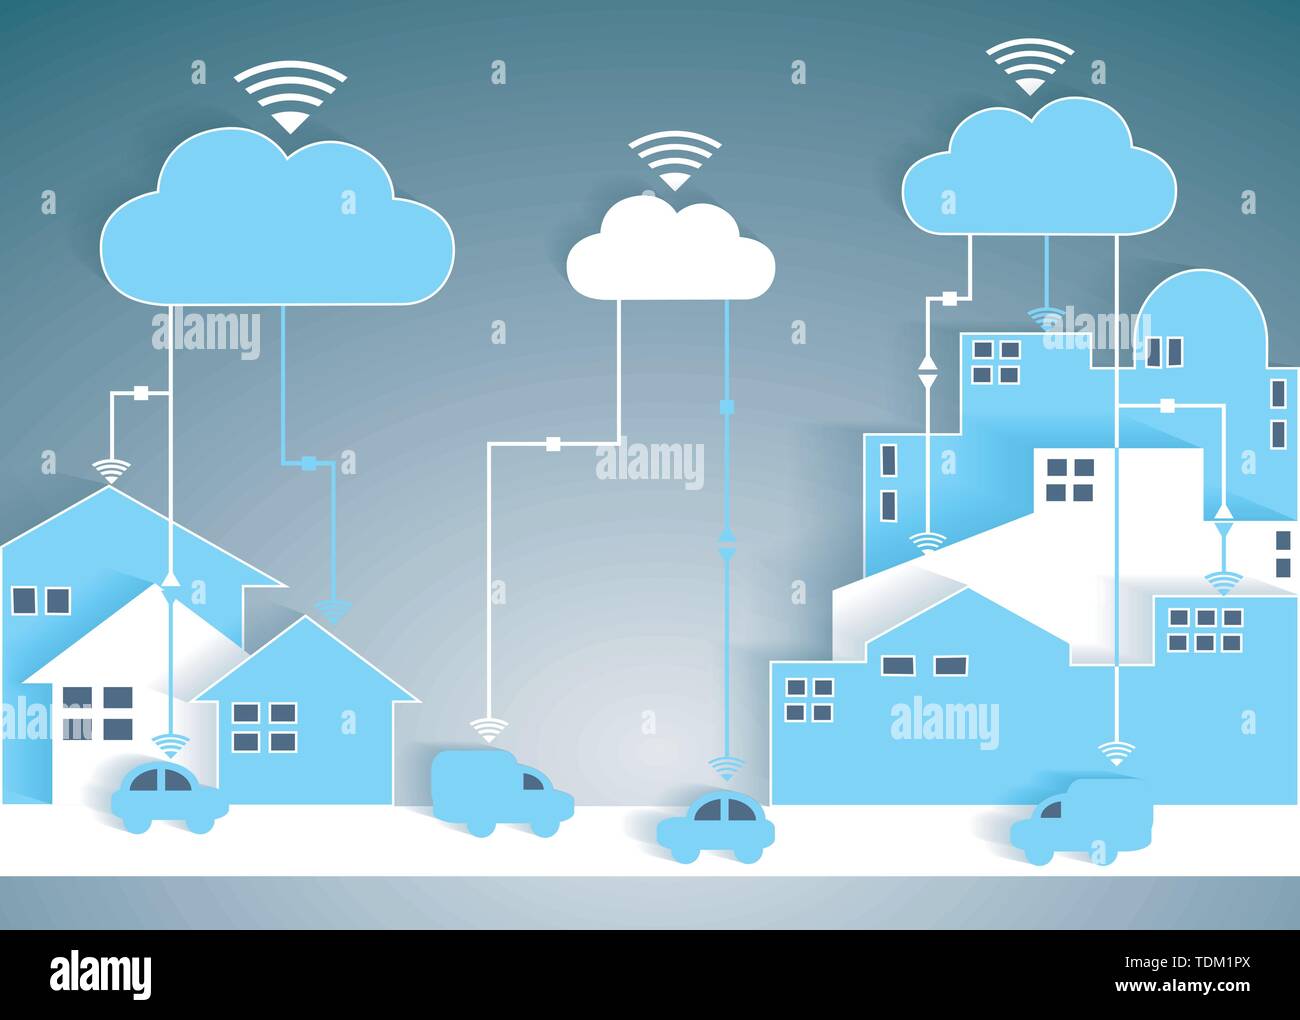 Cloud Computing Paper Cutout City and Suburb Network - Wifi Internet Connectivity concept, EPS10 Grouped and Layered Stock Vector